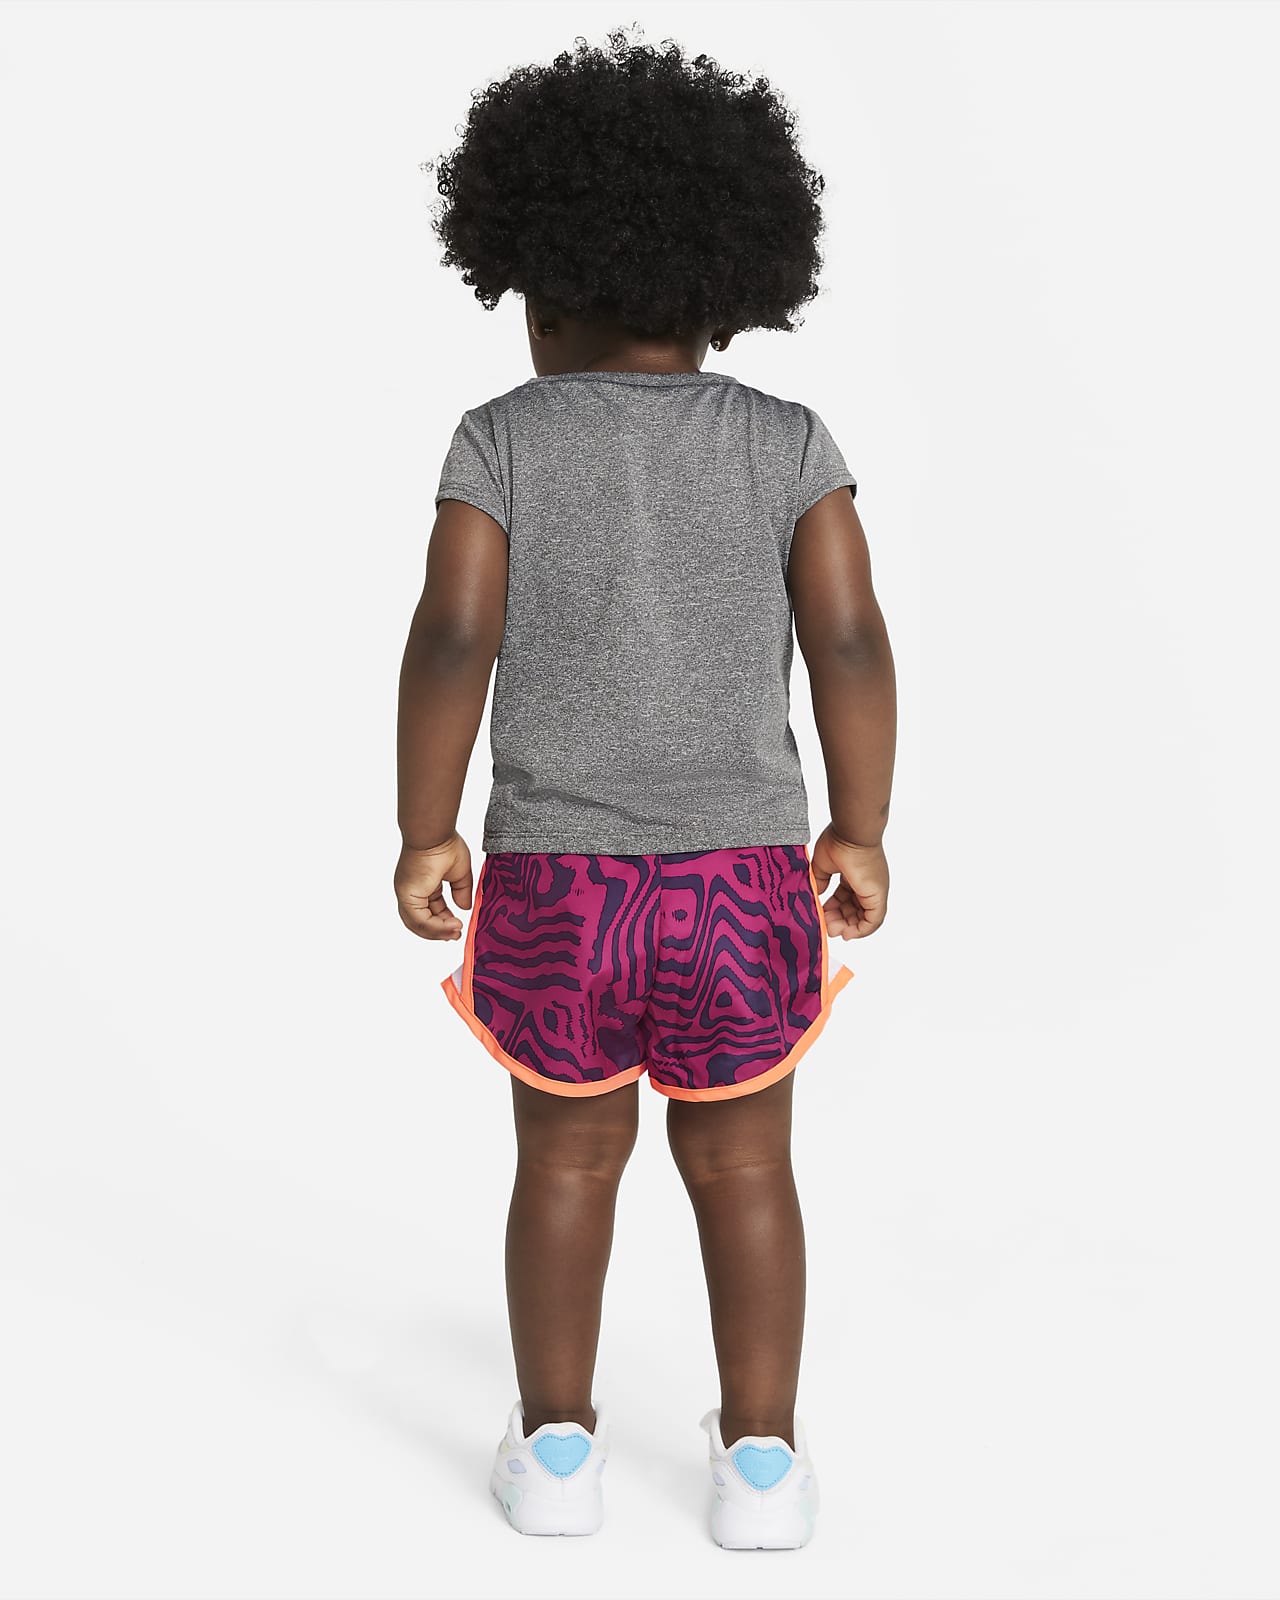 infant nike shorts and top set